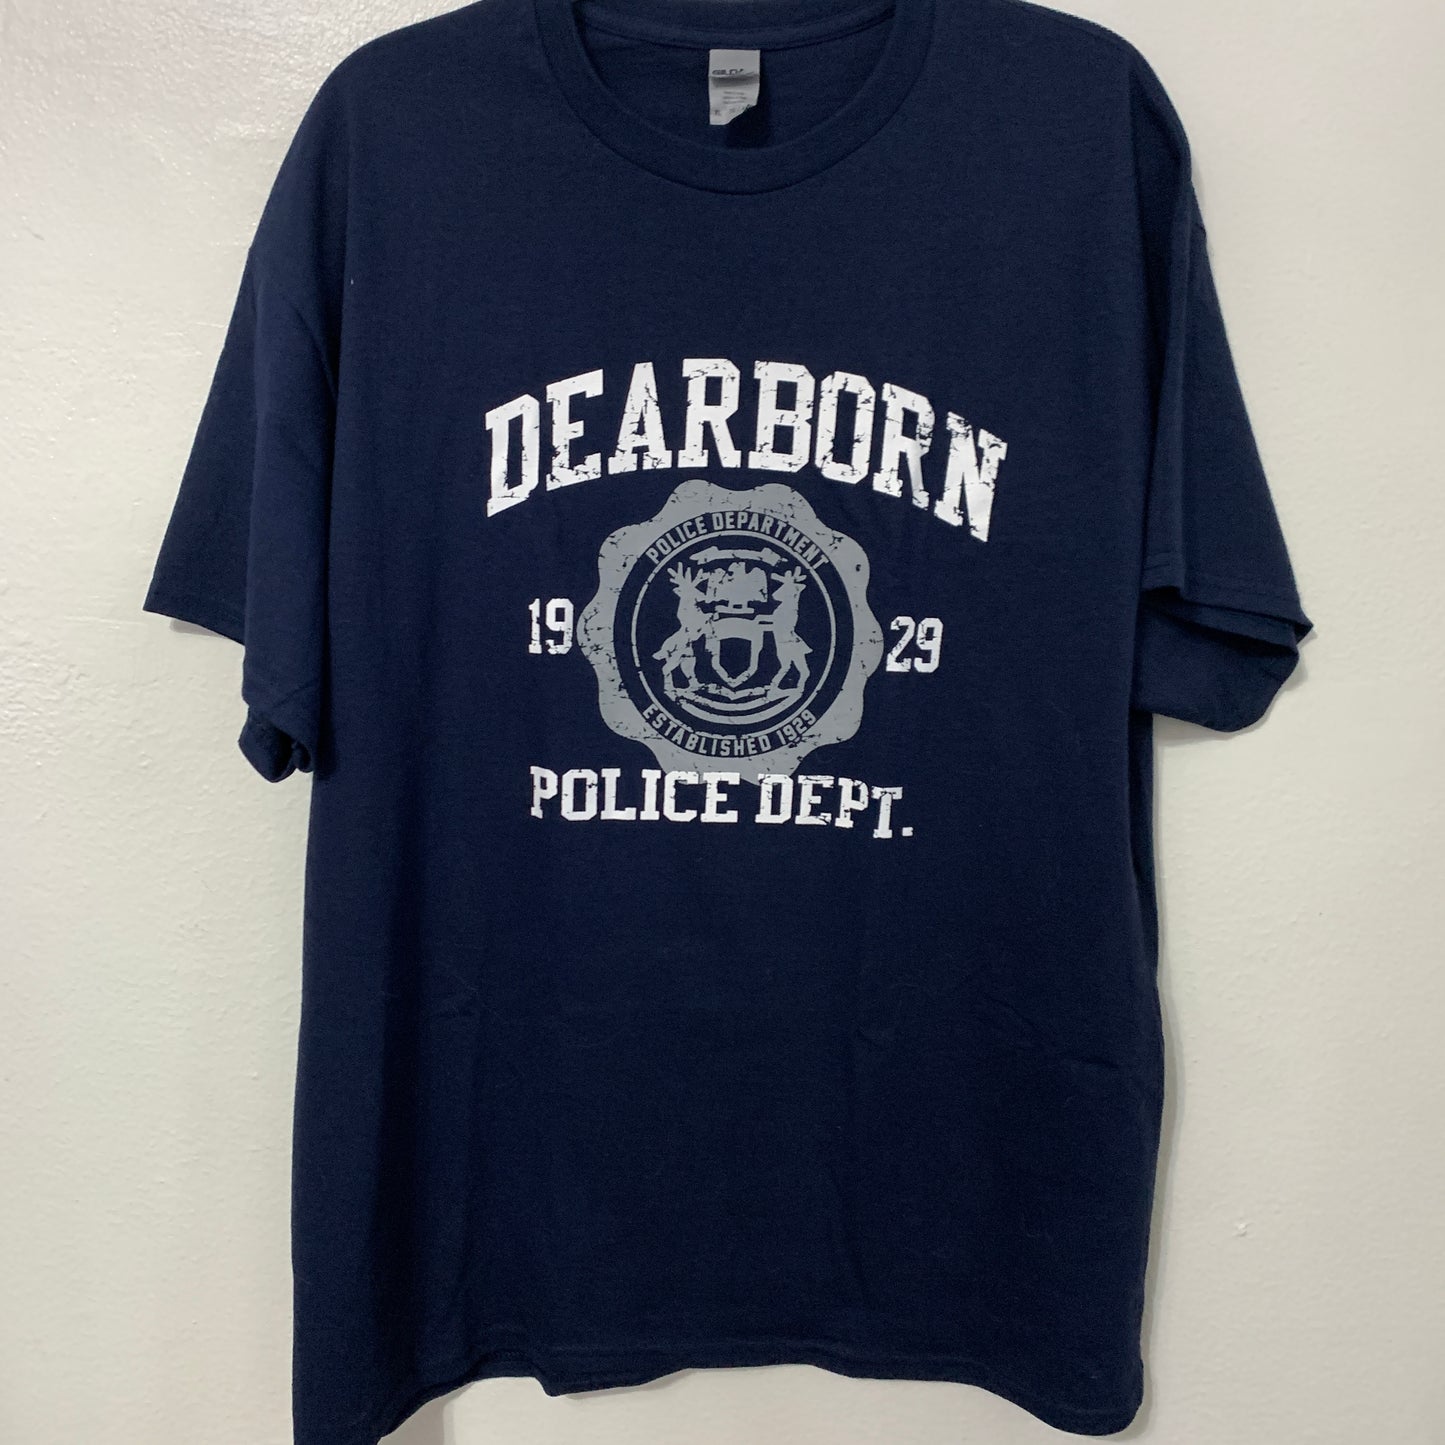 Dearborn Police Department T Shirt